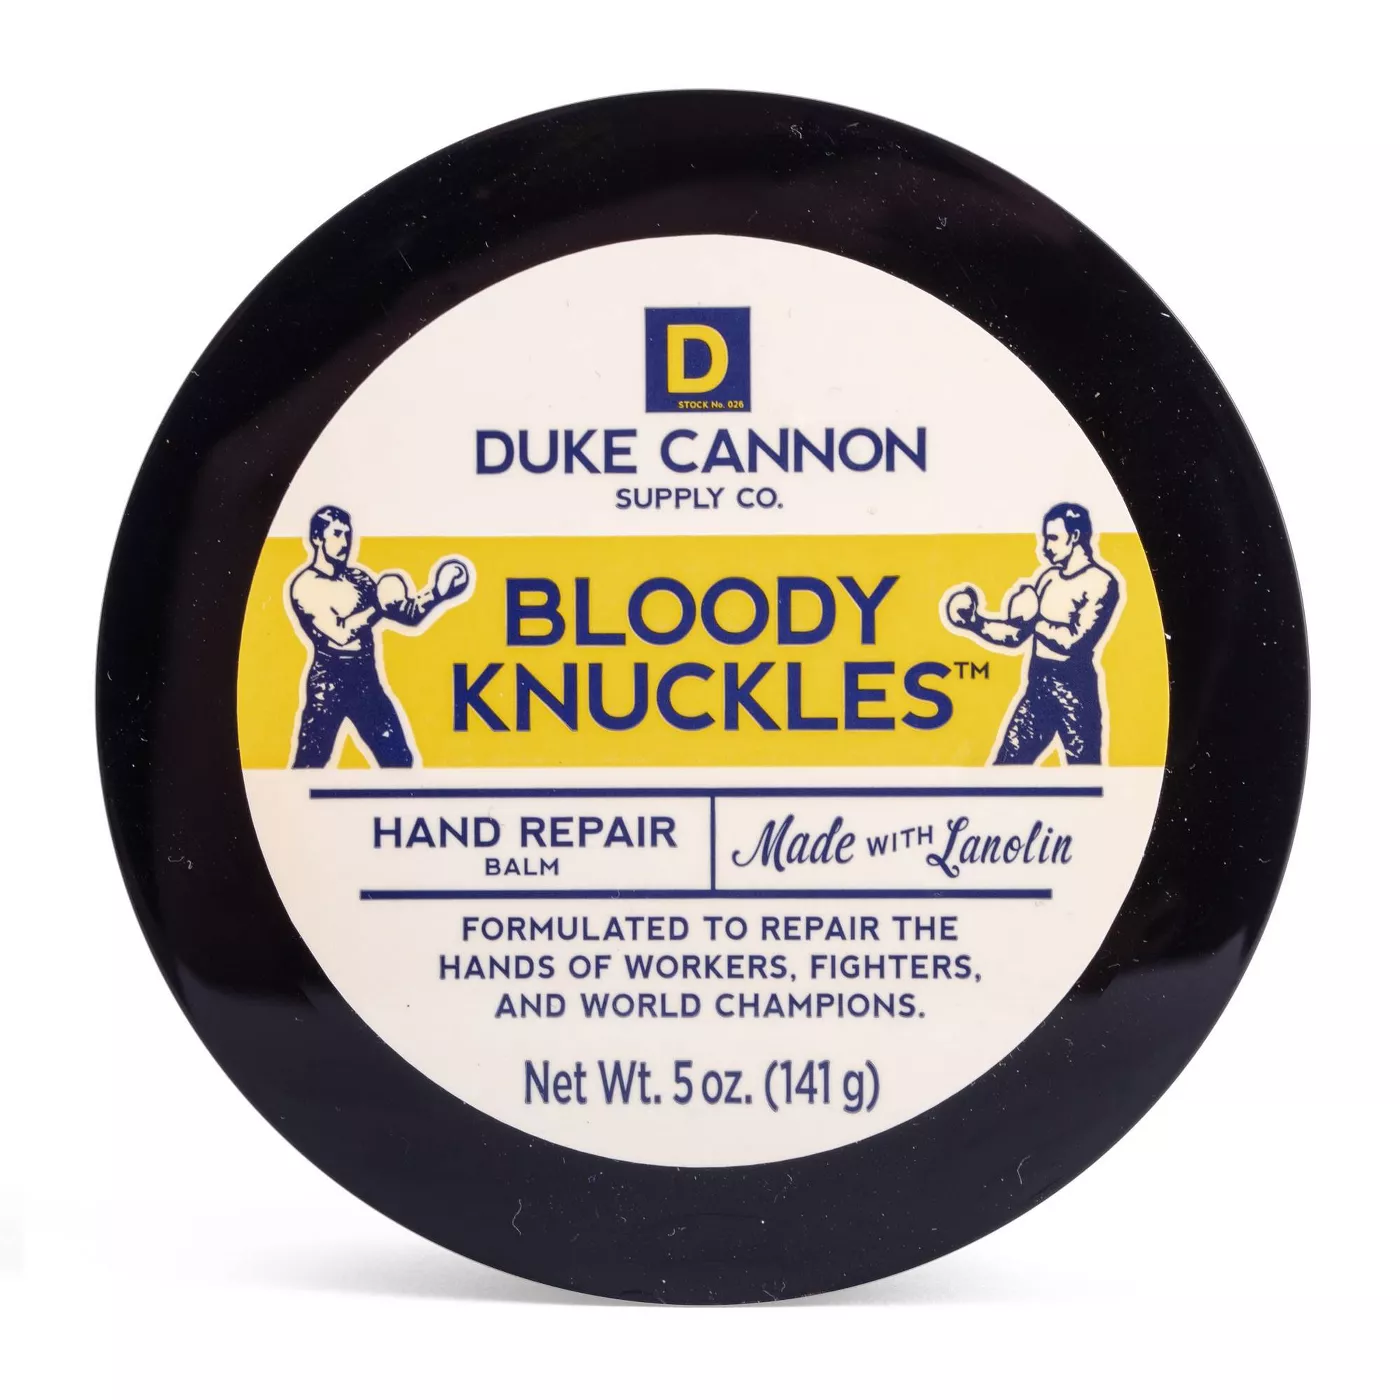 Duke Cannon Bloody Knuckles Fragrance Free Hand Repair Balm - 5oz - image 1 of 4